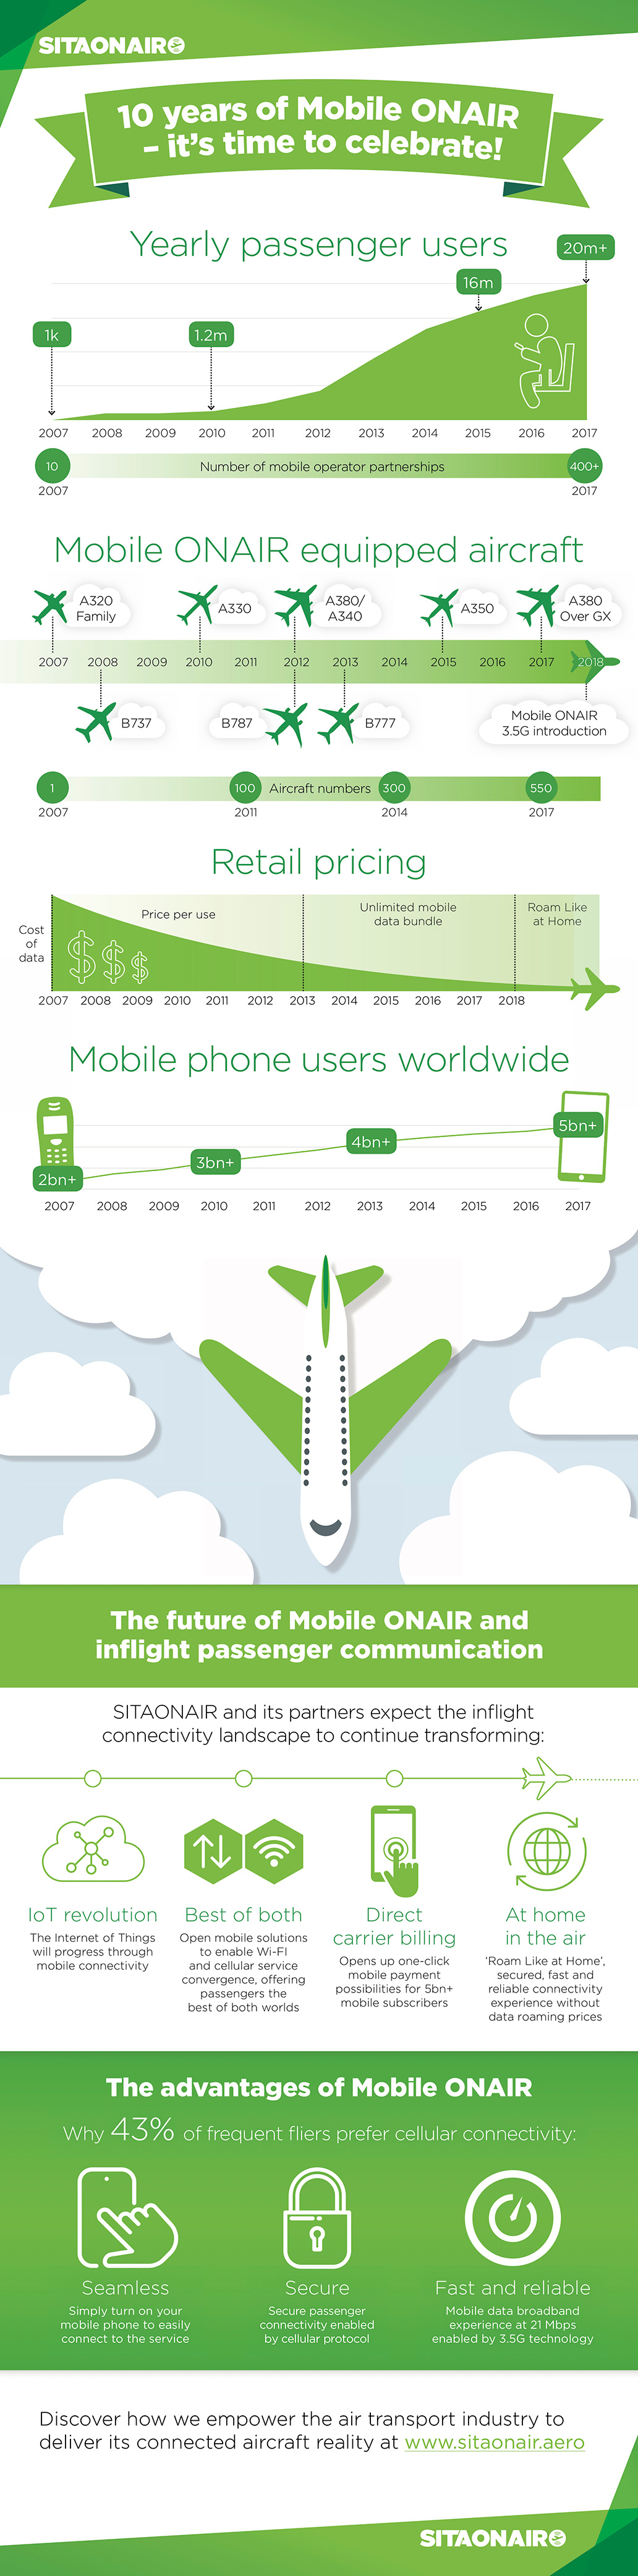 Infographic from SITAONAIR showing ten years of Mobile ONAIR